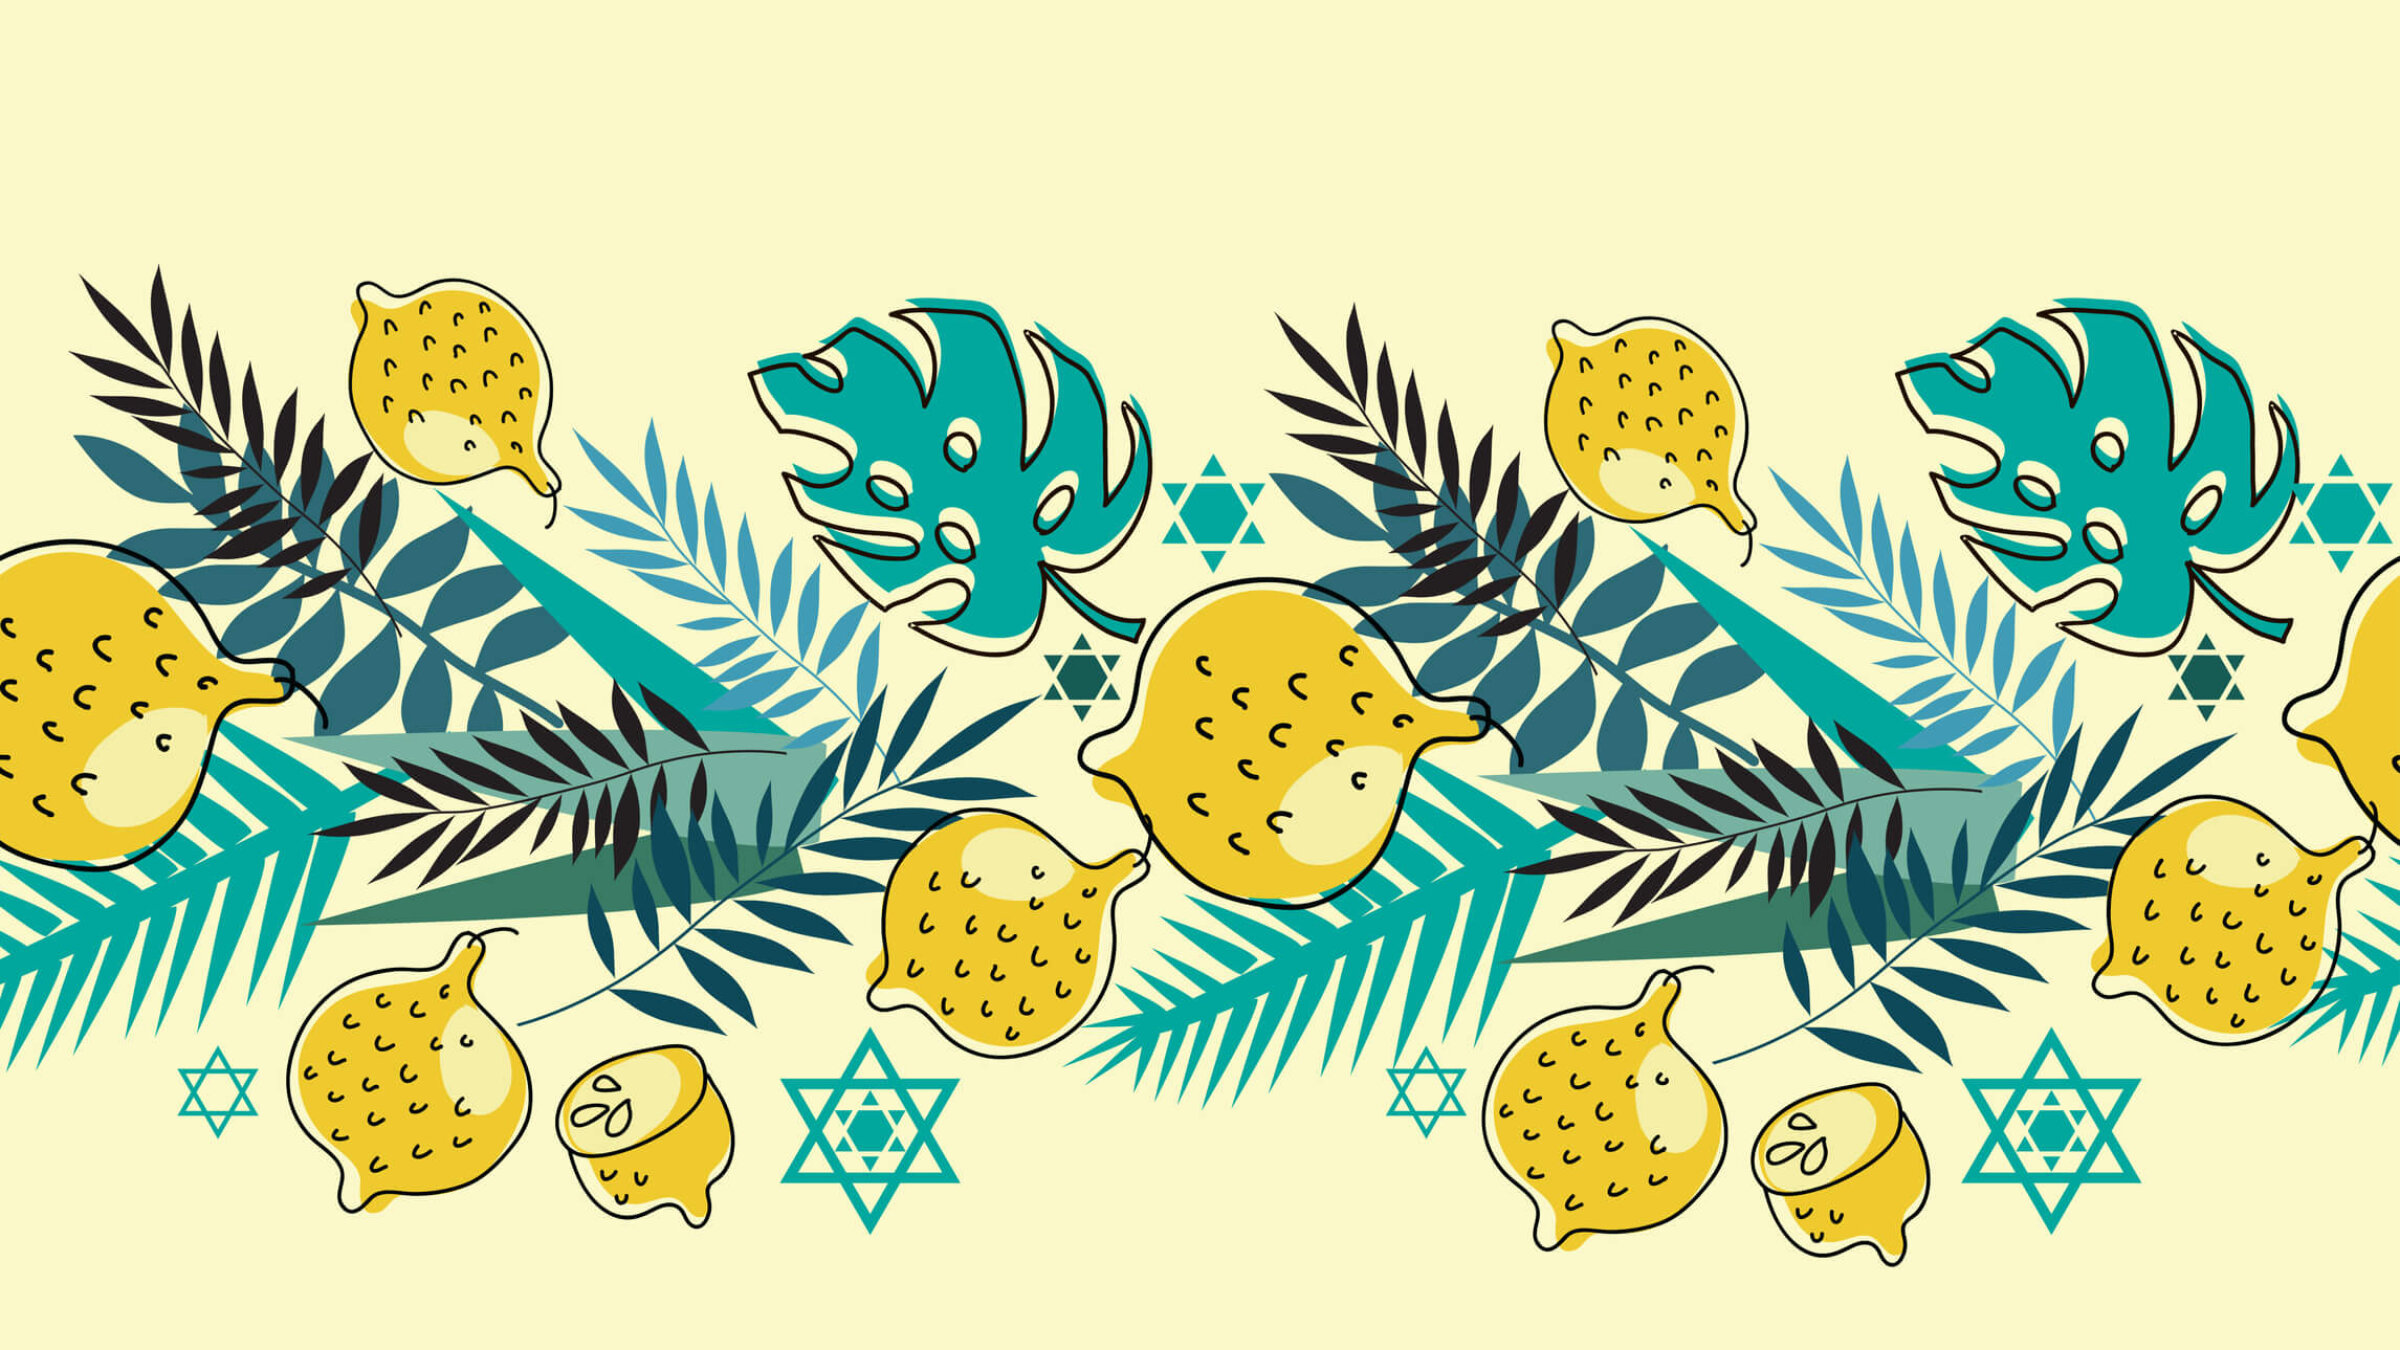 Jews celebrate Sukkot with the <i>arba minim</i>, a group of four plants bound together with straw: the <i>lulav</i> (palm frond), <i>etrog</i> (citron), <i>hadassim</i> (myrtle), and <i>aravot</i> (willow). The plants symbolize the various fruits of the earth but also the different kinds of people integral to a strong community.